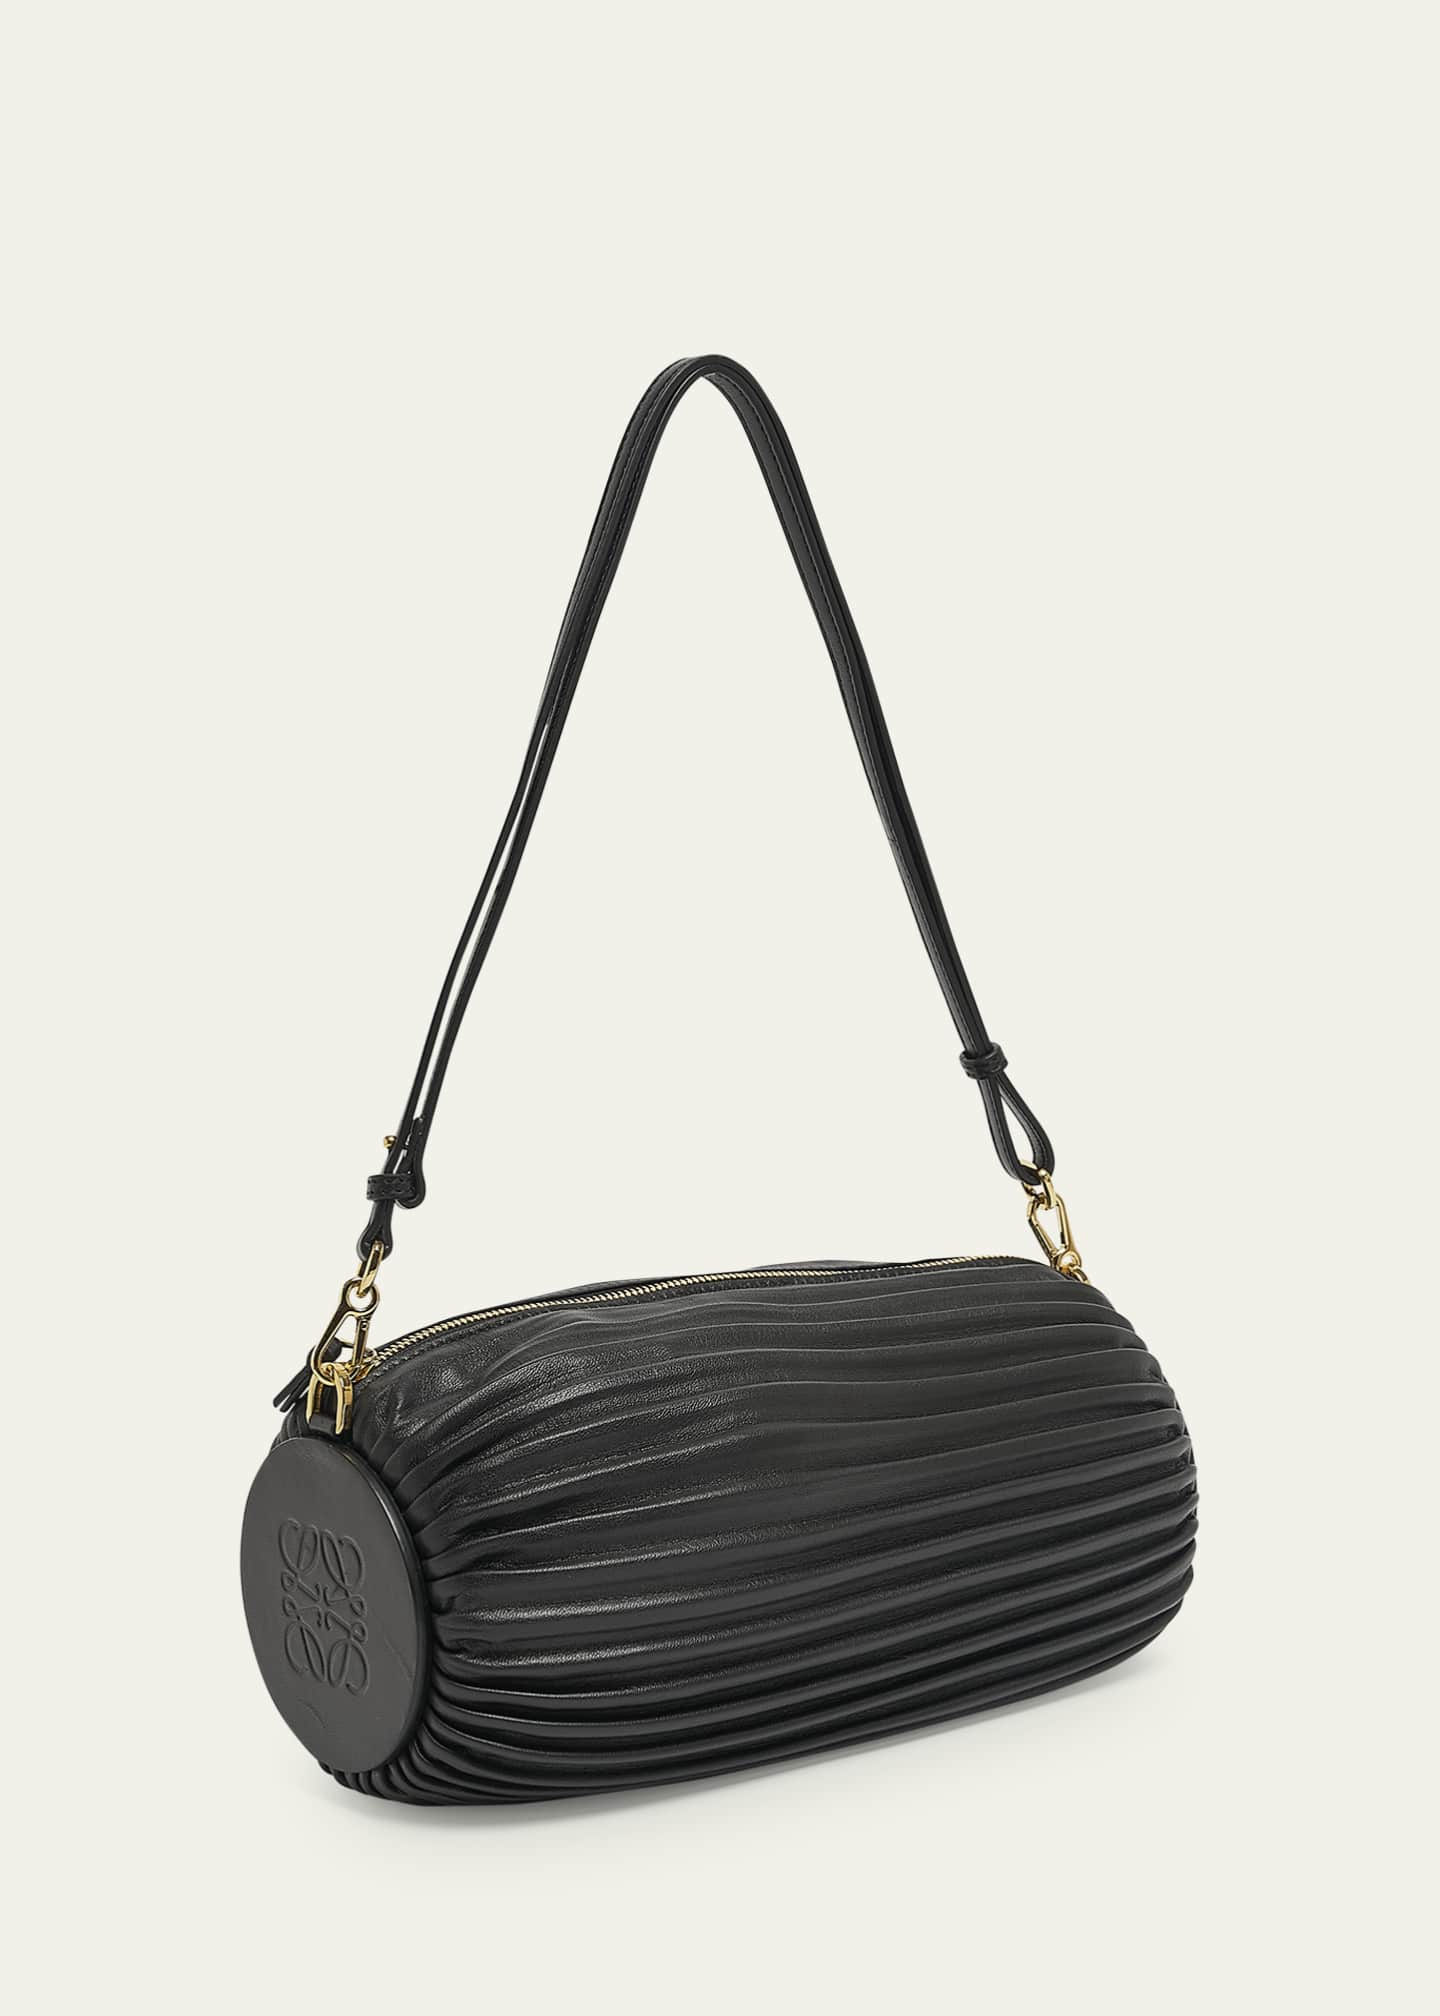 Loewe x Paula’s Ibiza Bracelet Pouch in Pleated Napa Leather with Leather Strap | Bergdorf Goodman